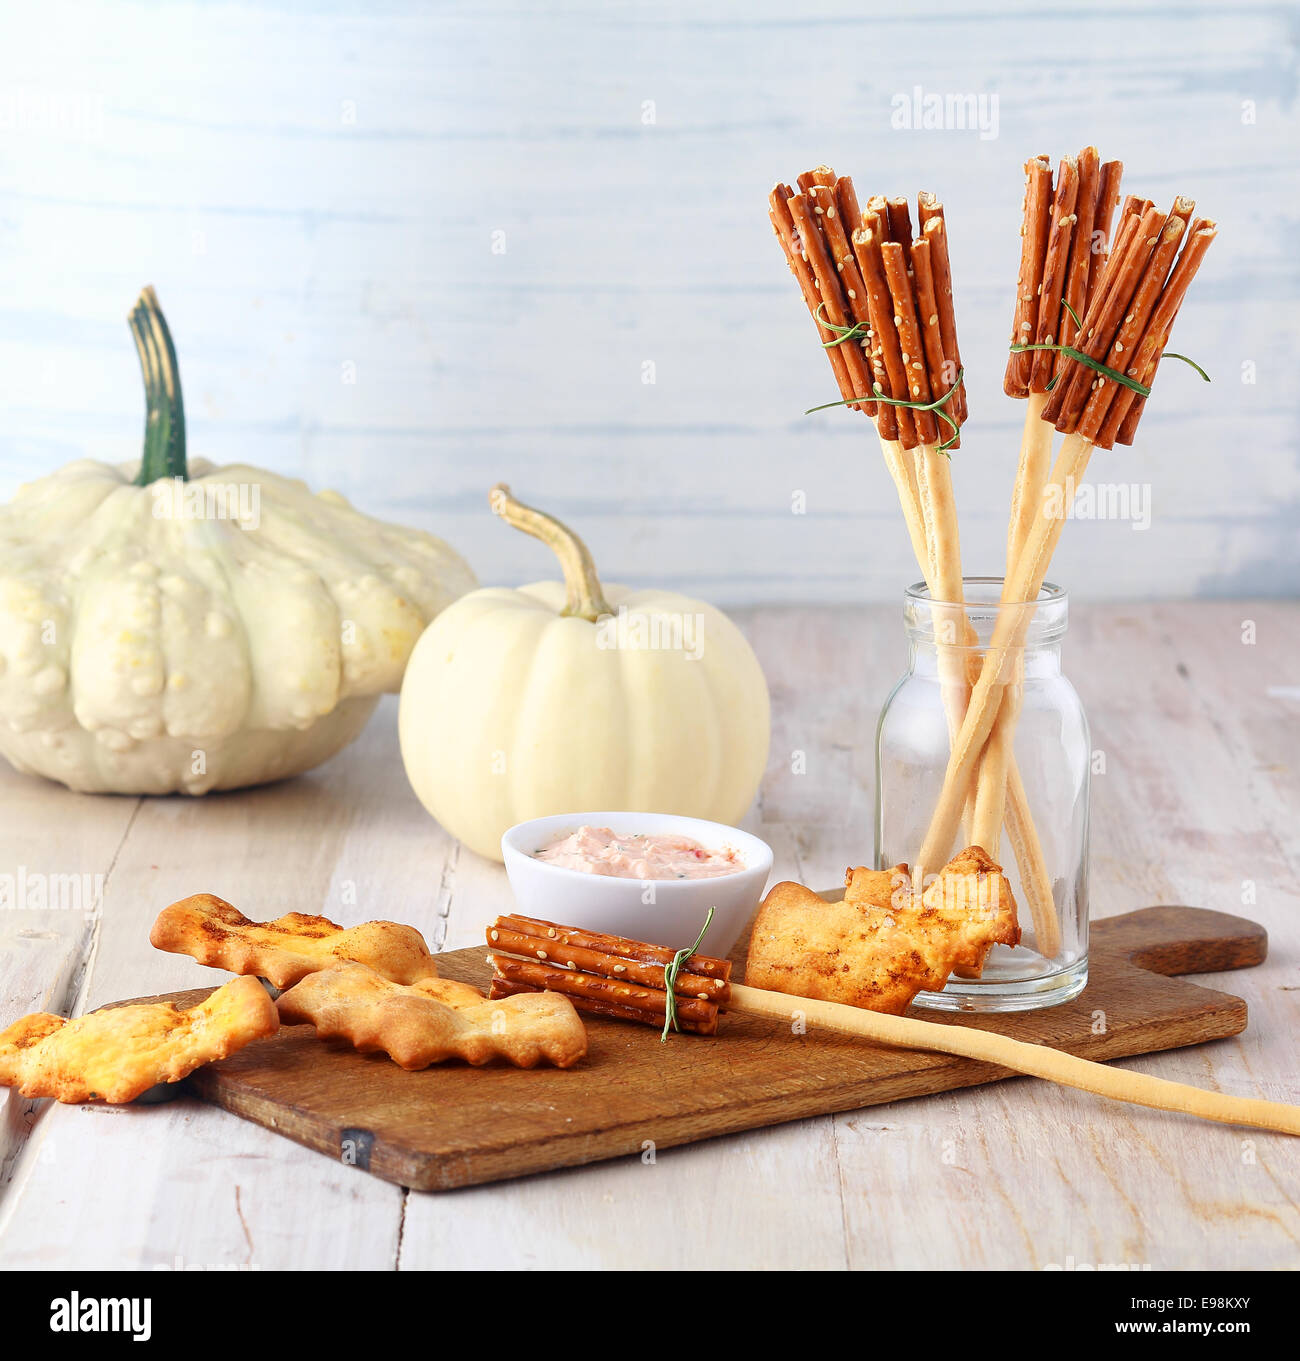 Fun homemade rustic Halloween witches broomstick appetizers made from bread sticks and pretzels served on a wooden board with a Stock Photo